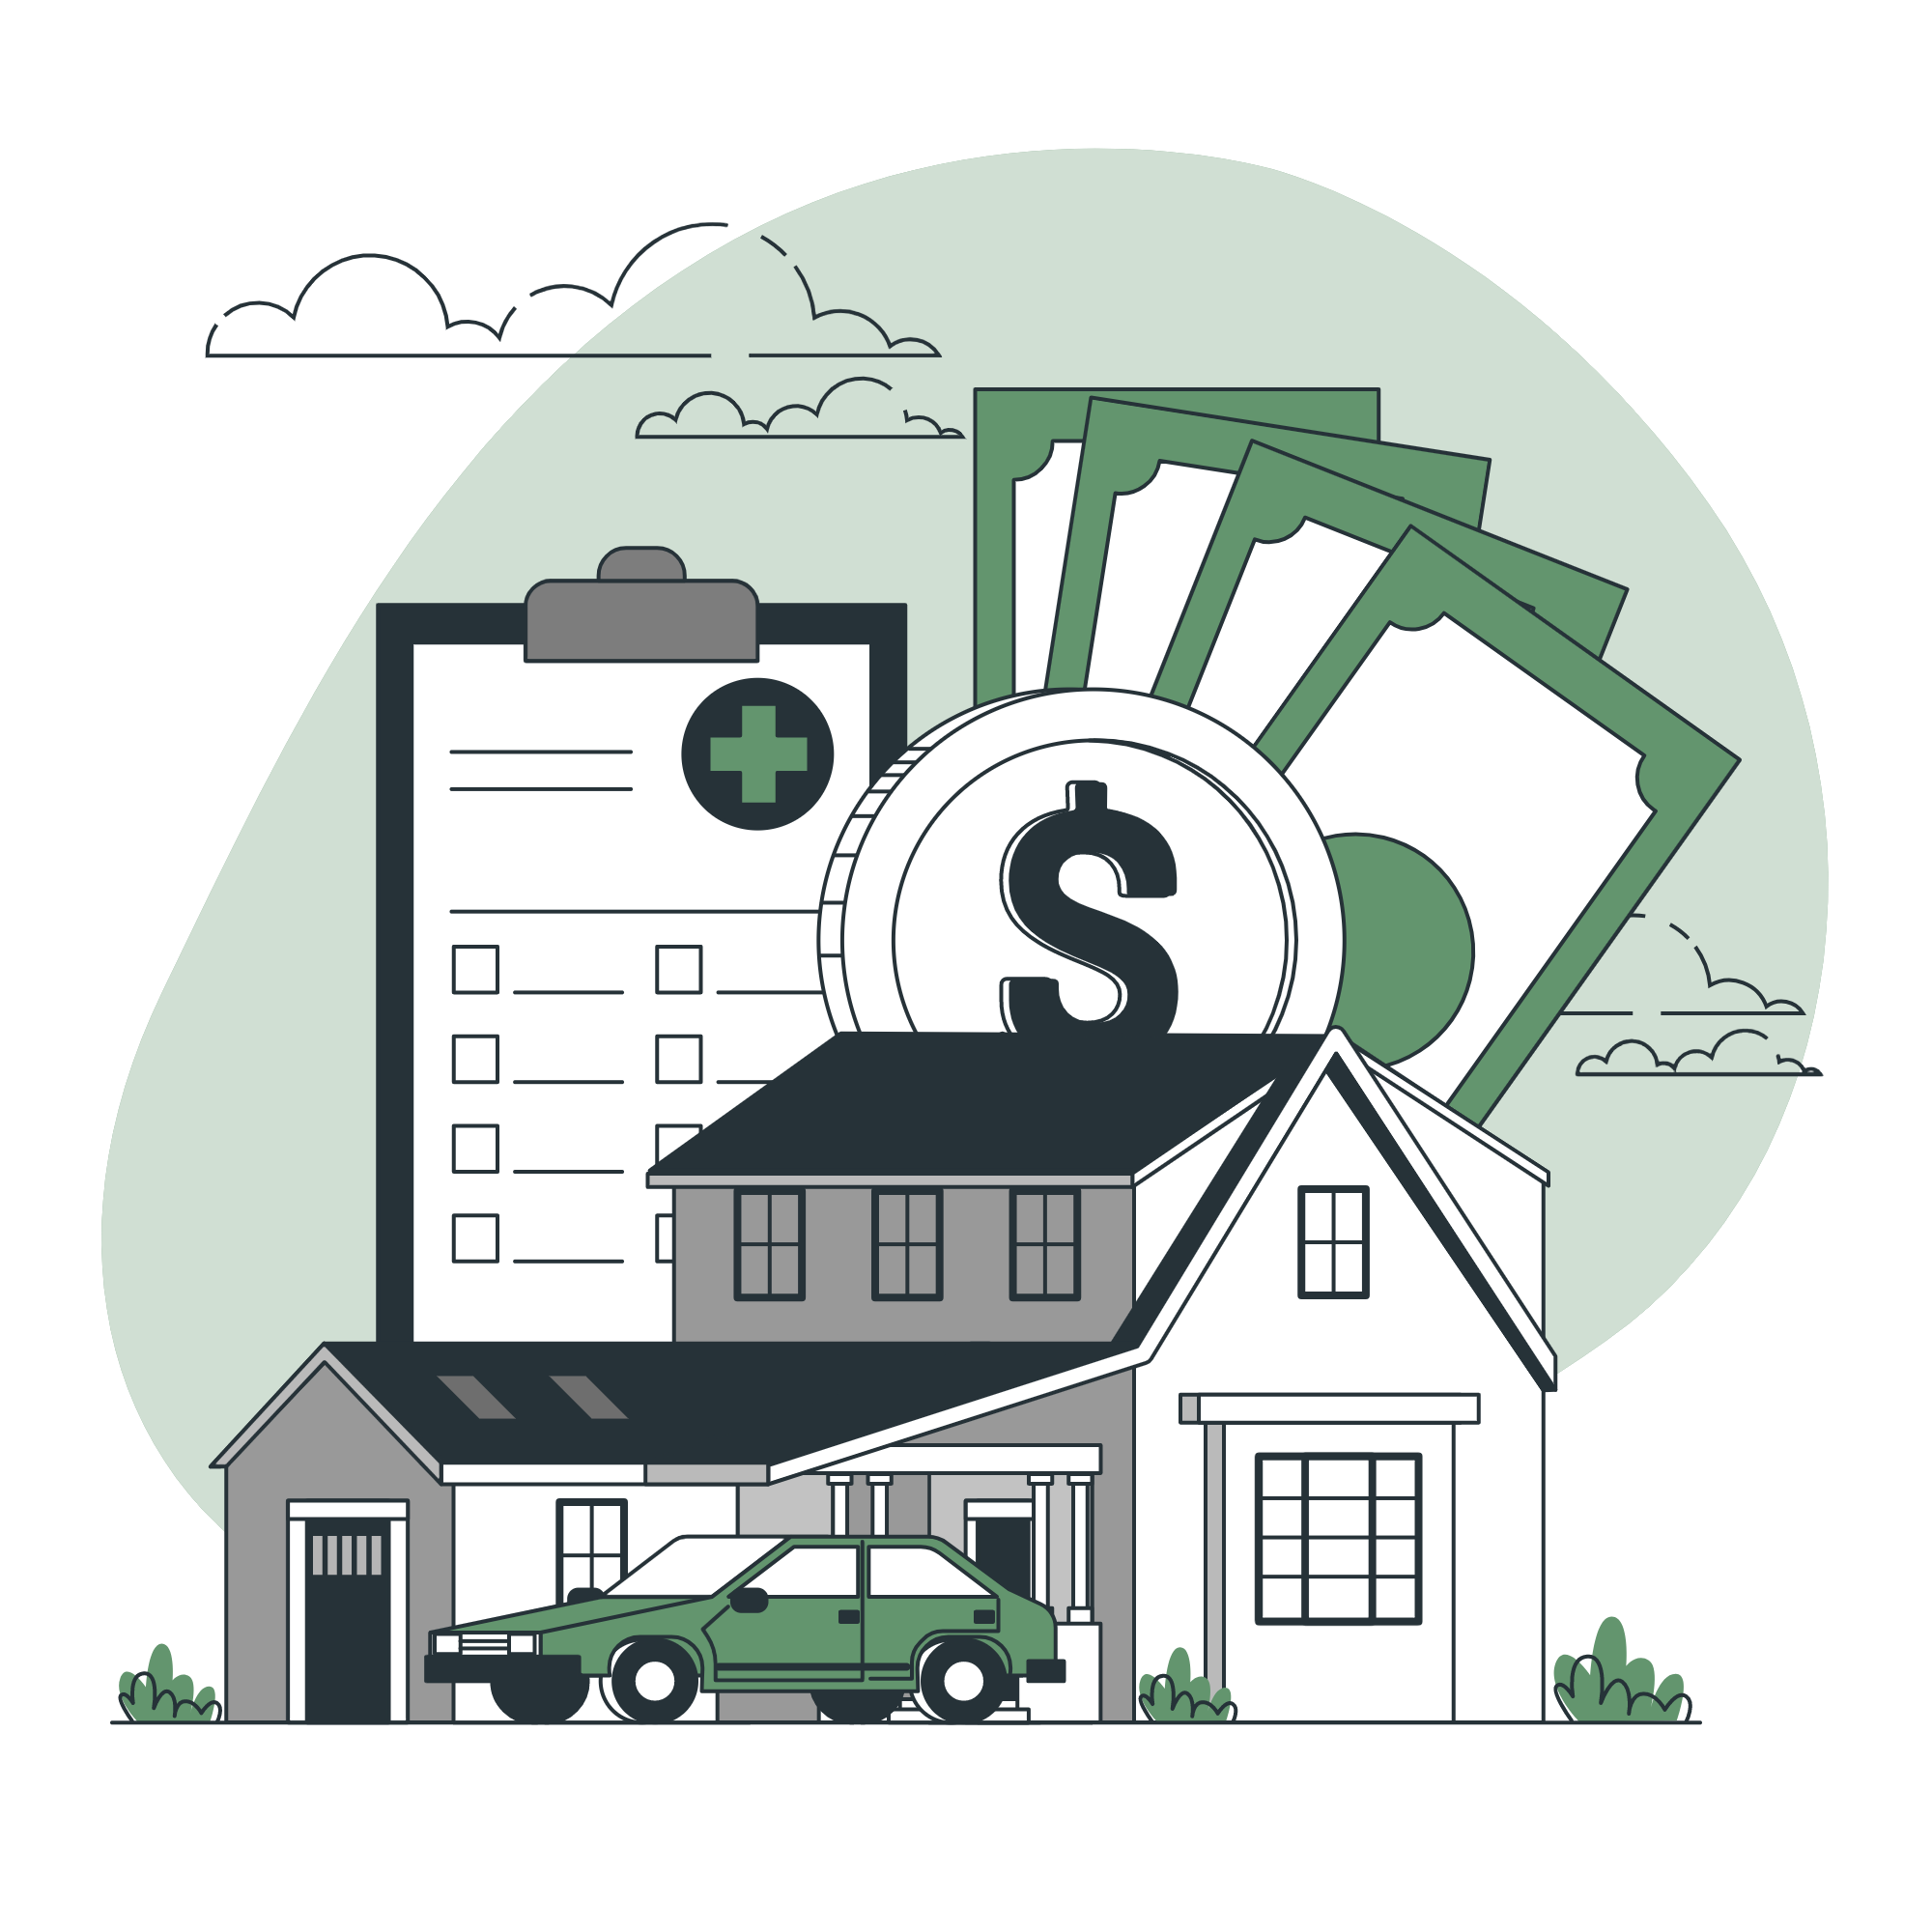 A-large-house-with-a-sedan-parked-in-front-and-the-image-of-money-portrayed-in-the-background-symbolizing-insurance-coverage-salt-and-pepper-finance